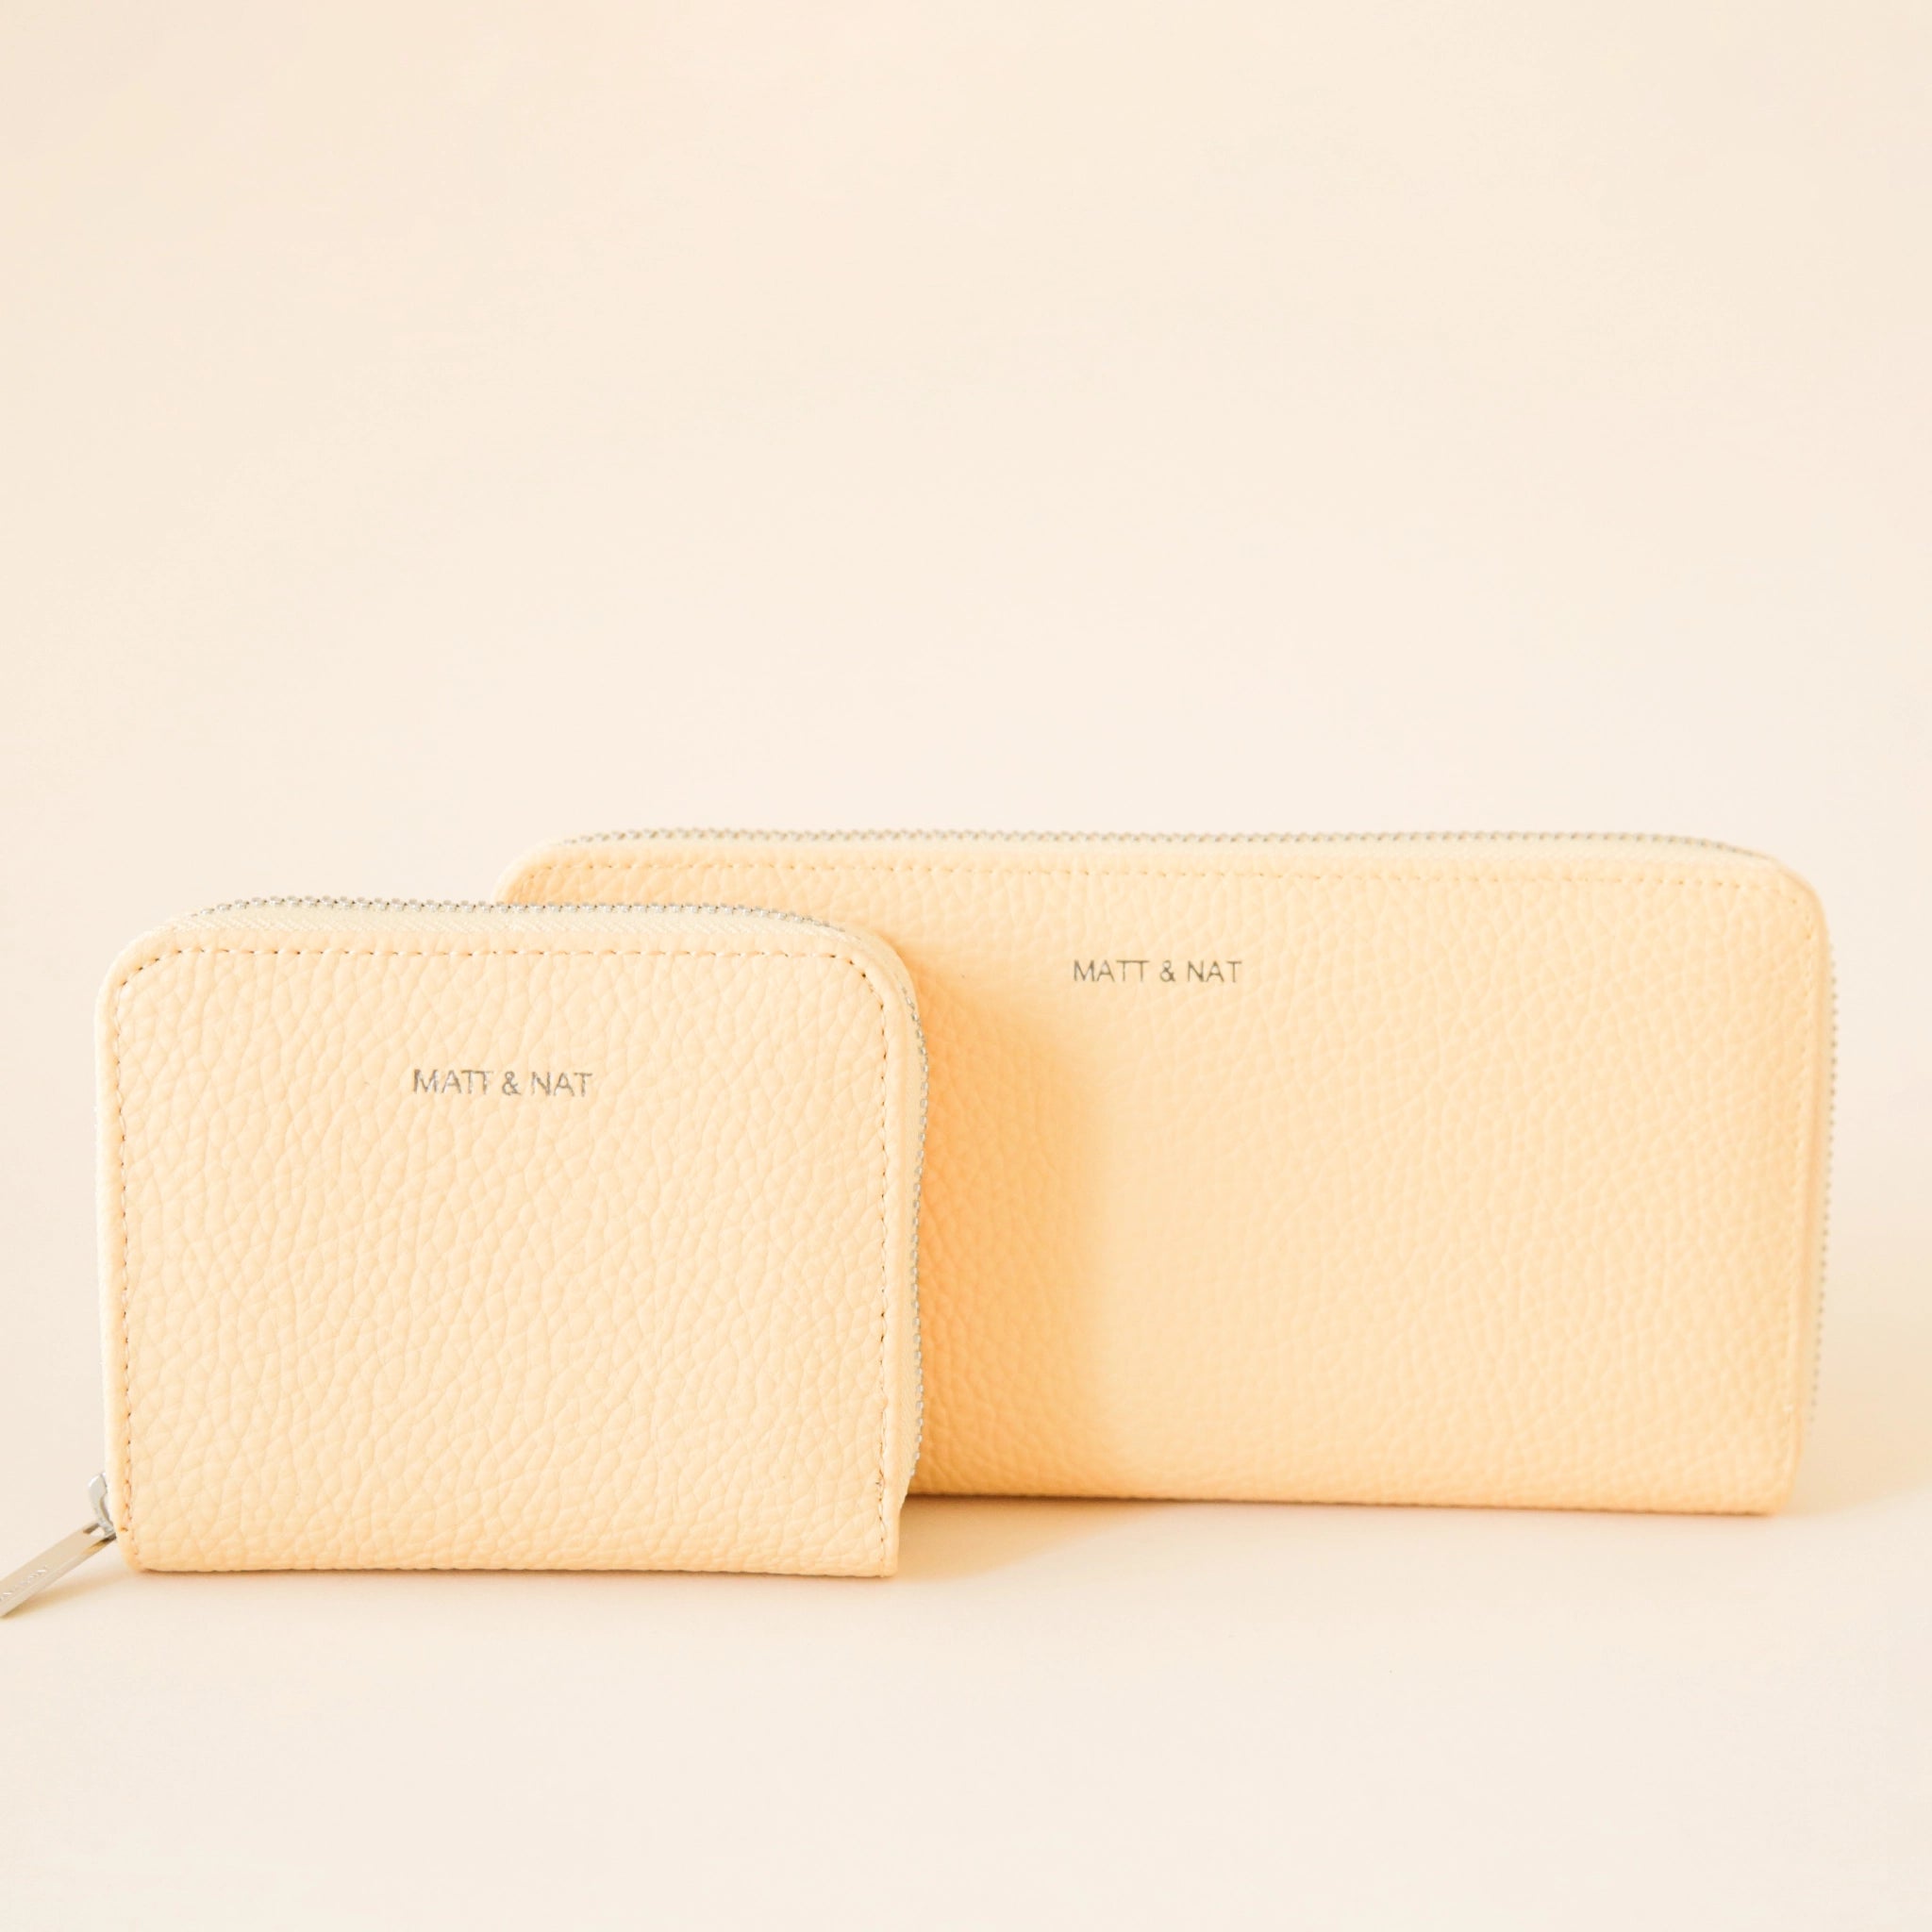 On a cream background is a light yellow zip wallet with silver detailing and "Matt & Nat" written tiny on the front of the wallet, photographed with a smaller square shaped wallet. 